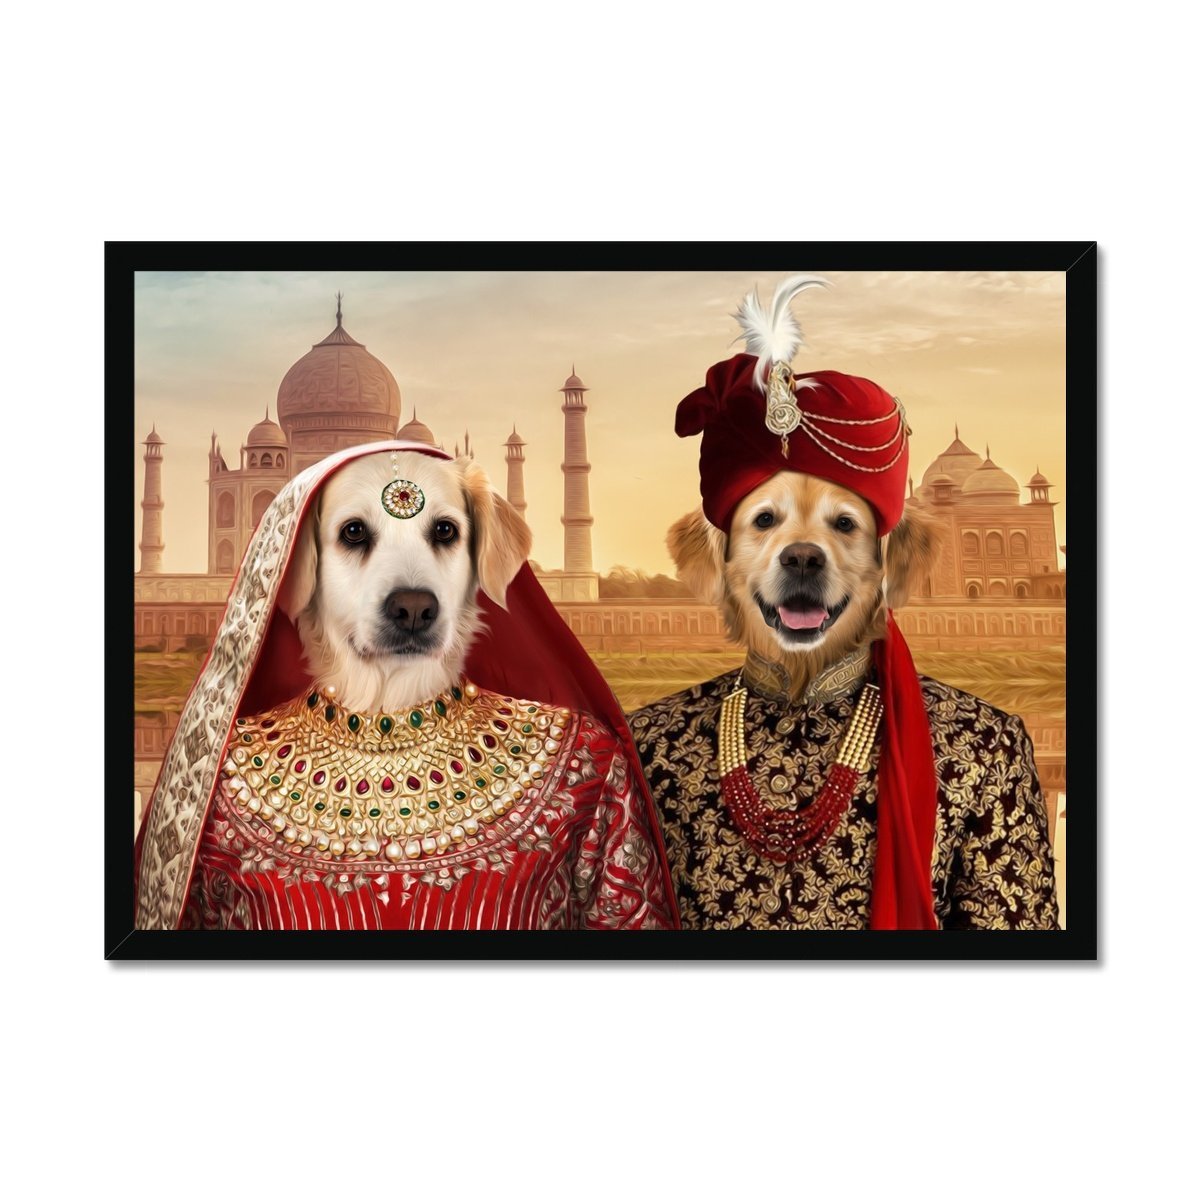 The Indian Royals: Custom Framed 2 Pet Portrait - Paw & Glory, paw and glory, dog painting pictures, happy tails portraits, pet painting in costume, cat painting royal, funny dog canvas art, print your pet uk, pet portrait